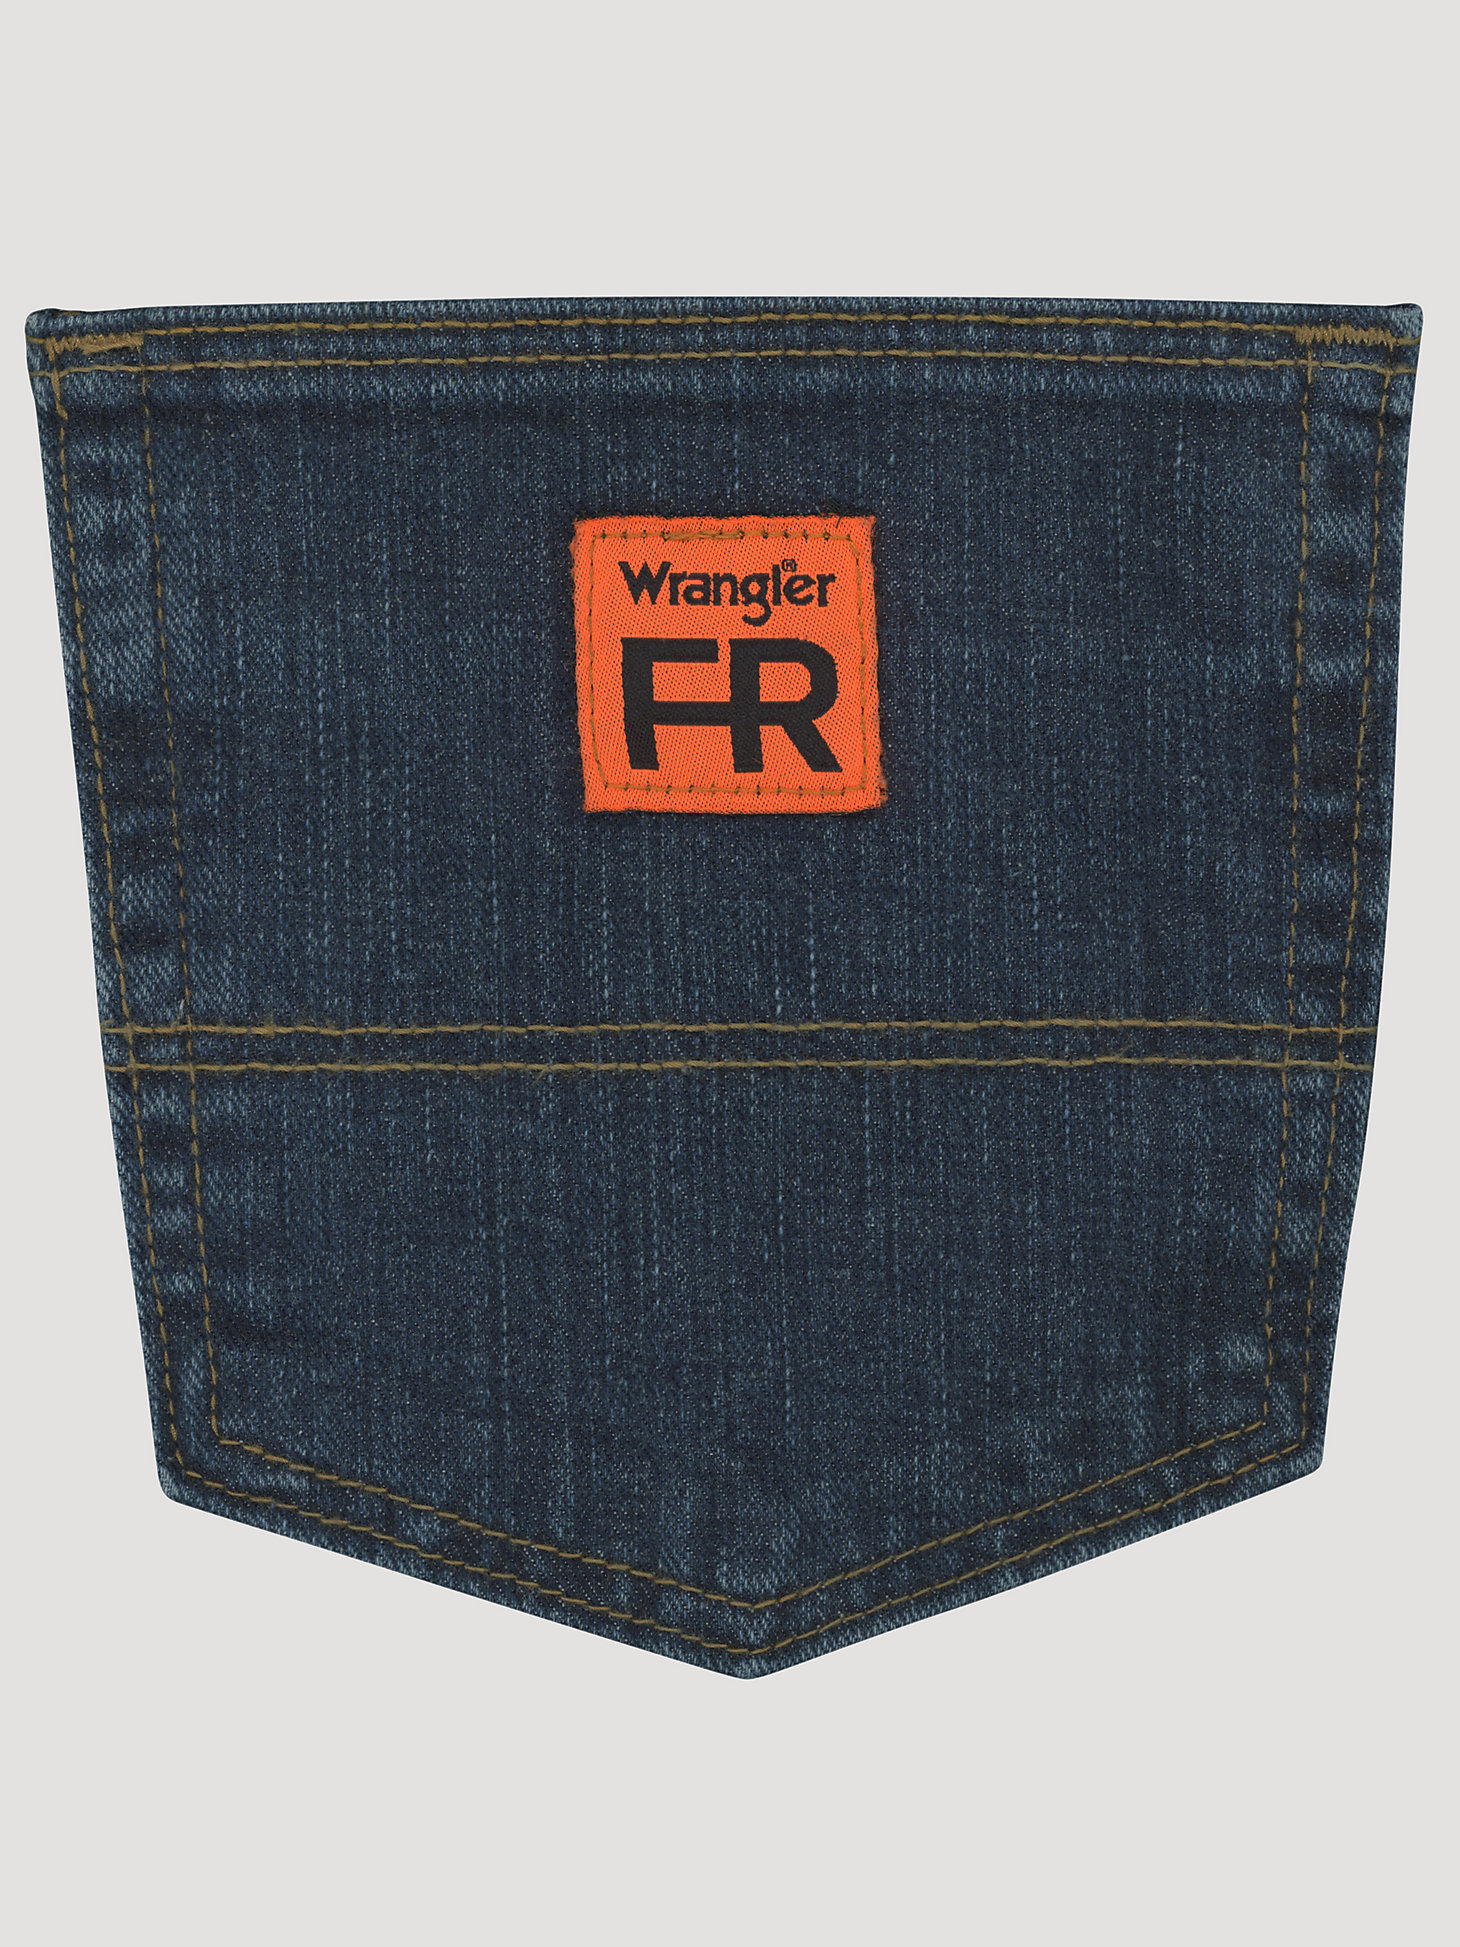 Wrangler® RIGGS Workwear® FR Flame Resistant Advanced Comfort Relaxed Fit Jean in Midstone alternative view 3